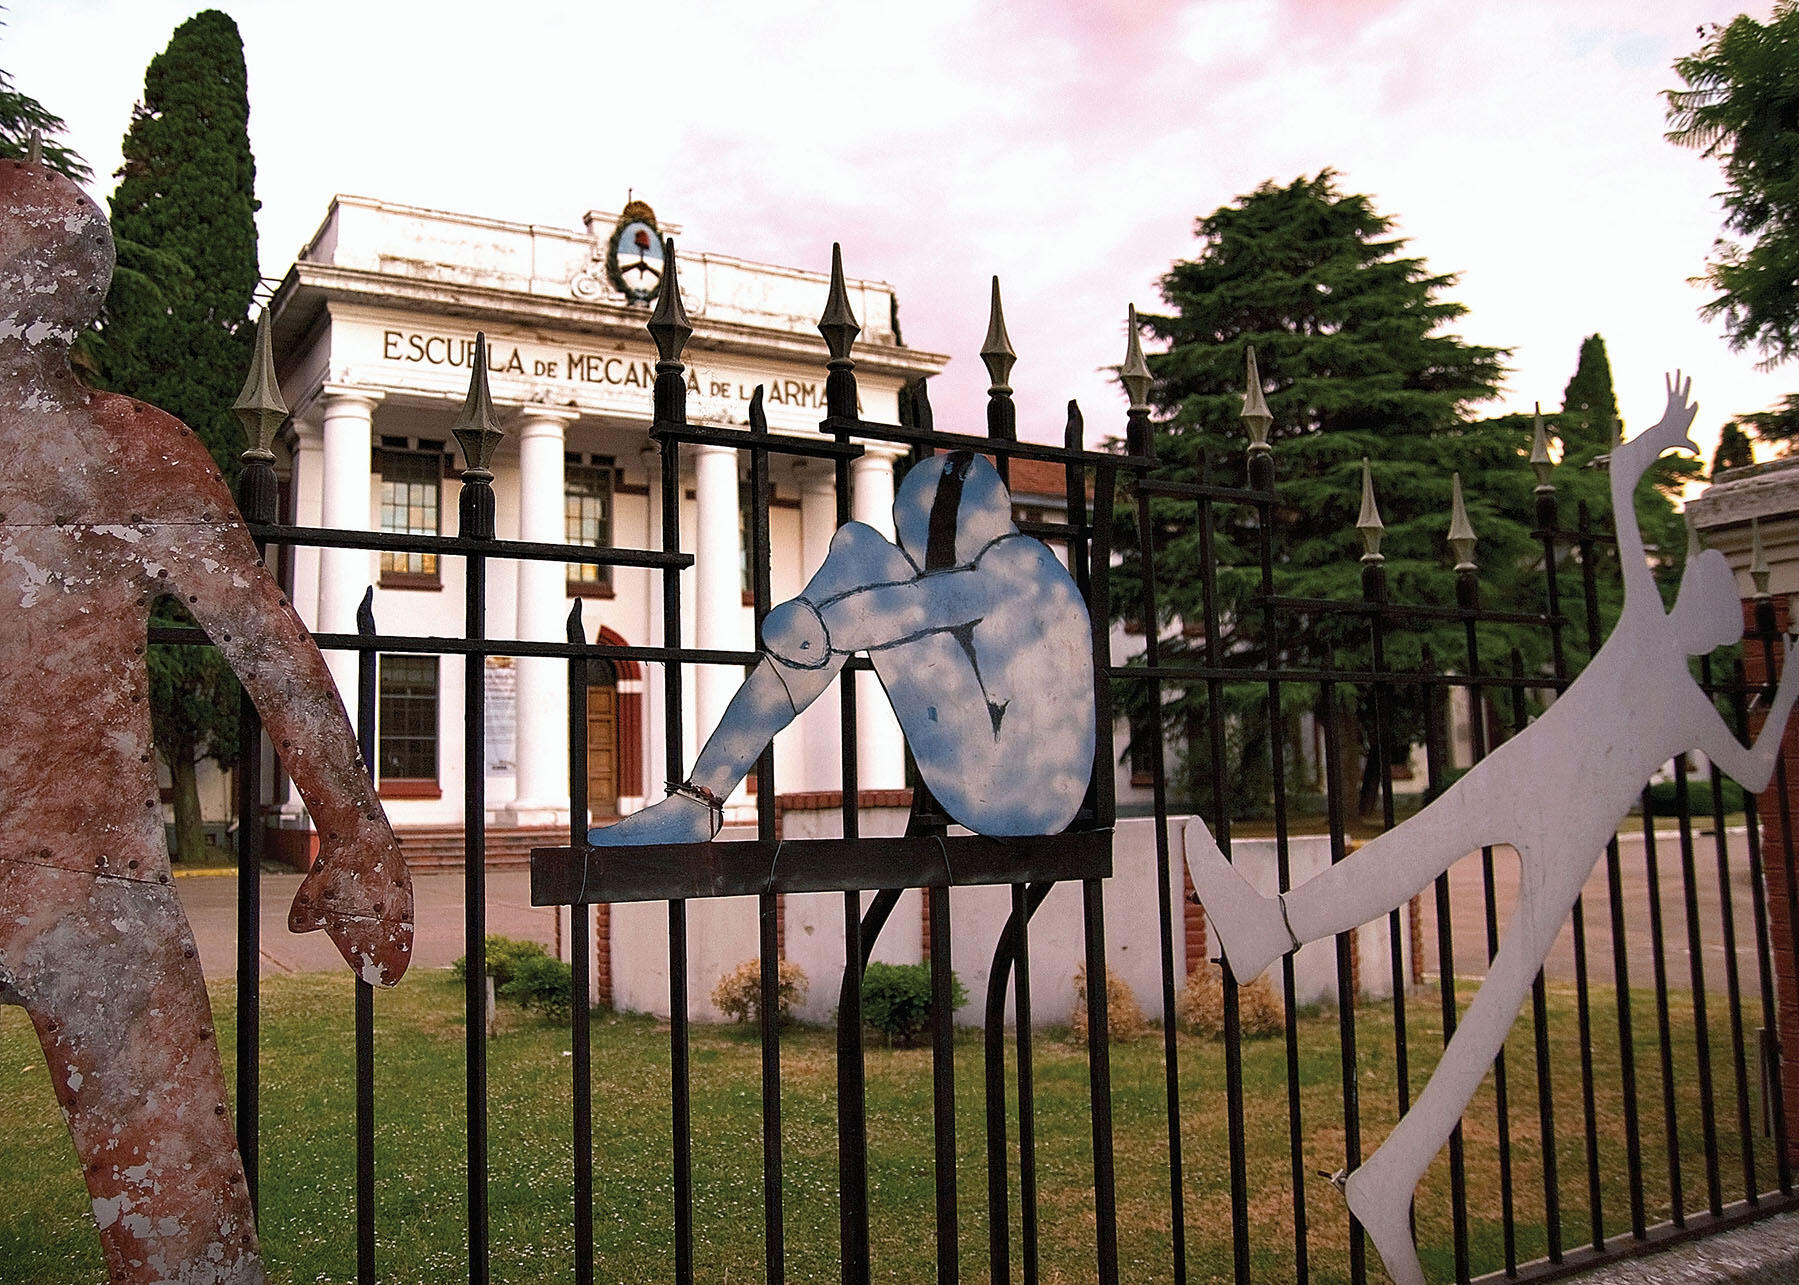 Metal figures welded to a fence form a memorial to torture victims in front of Argentina’s Escuela de Mecánica de la Armada (ESMA). (Photo by David A. Wilbanks.)